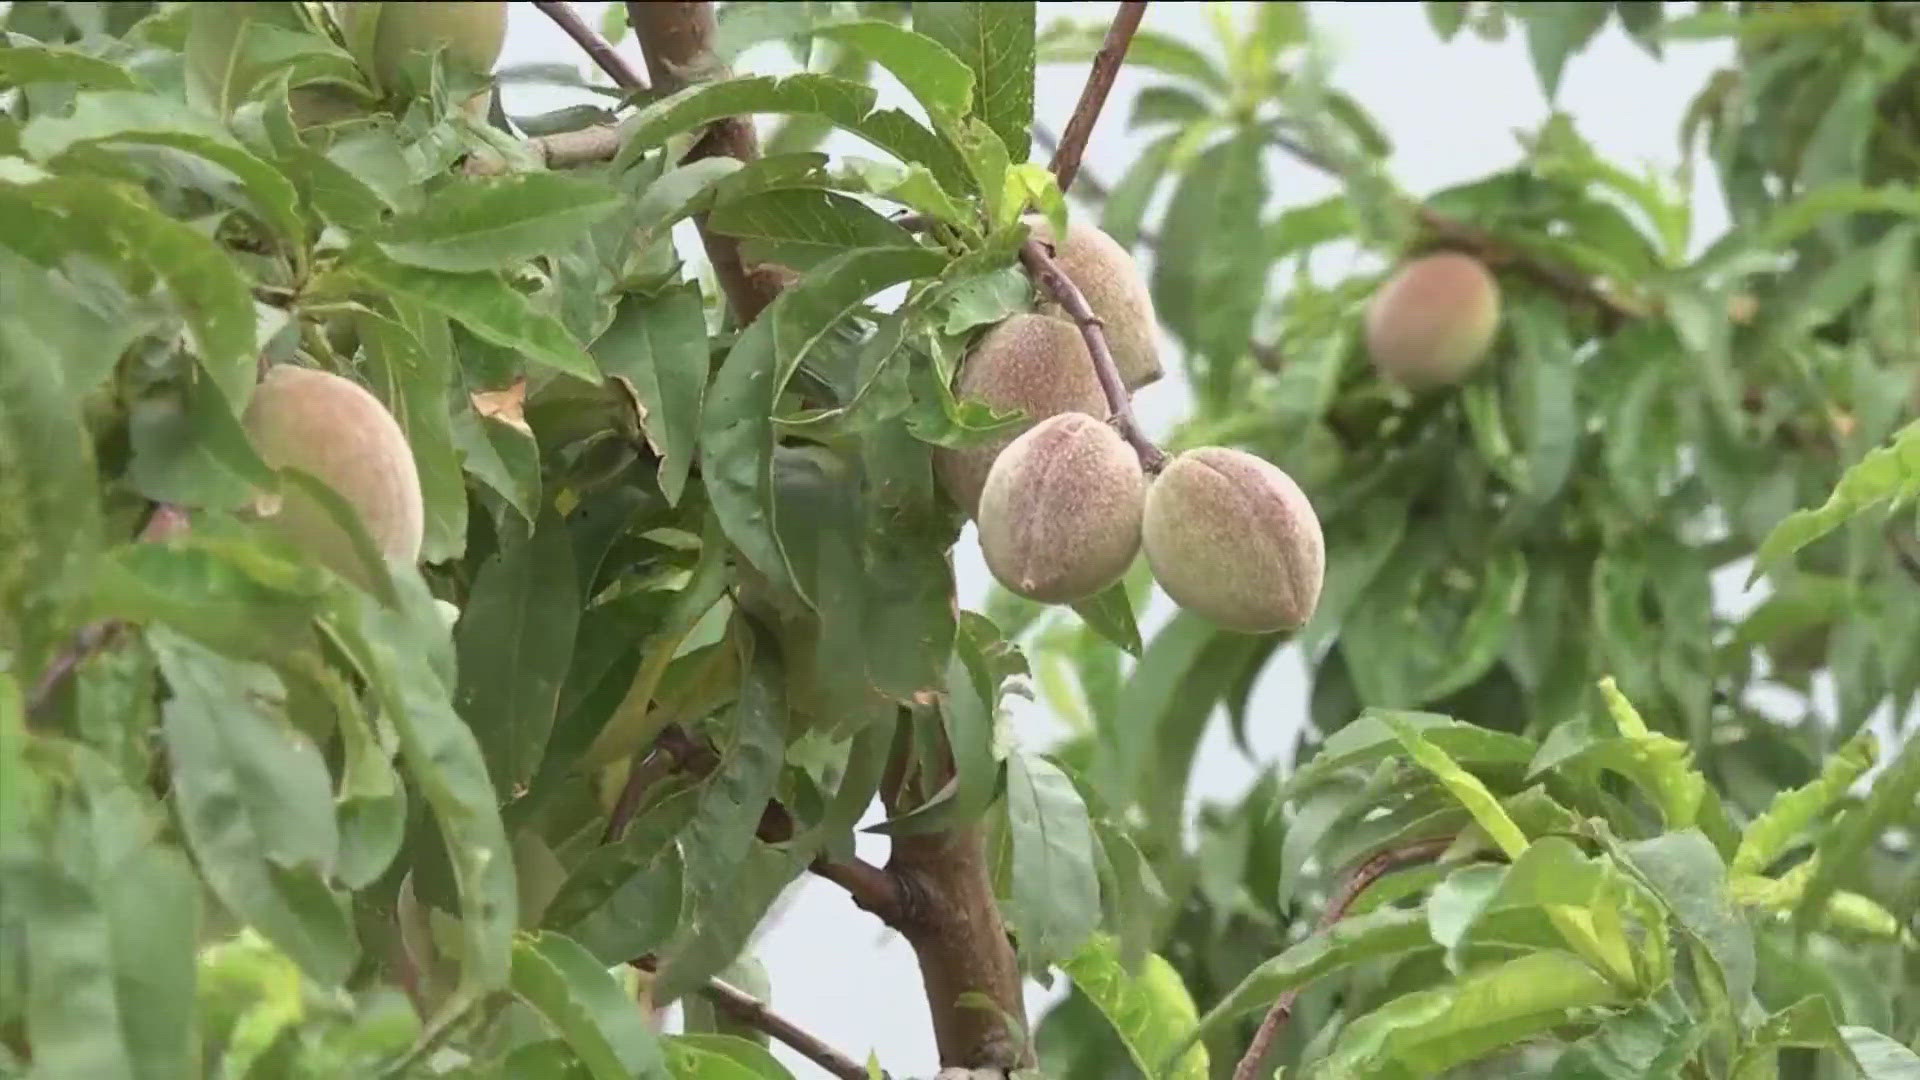 Farmers in Fredericksburg and across the Hill Country are expecting this year's harvest to be ready in a month or so.